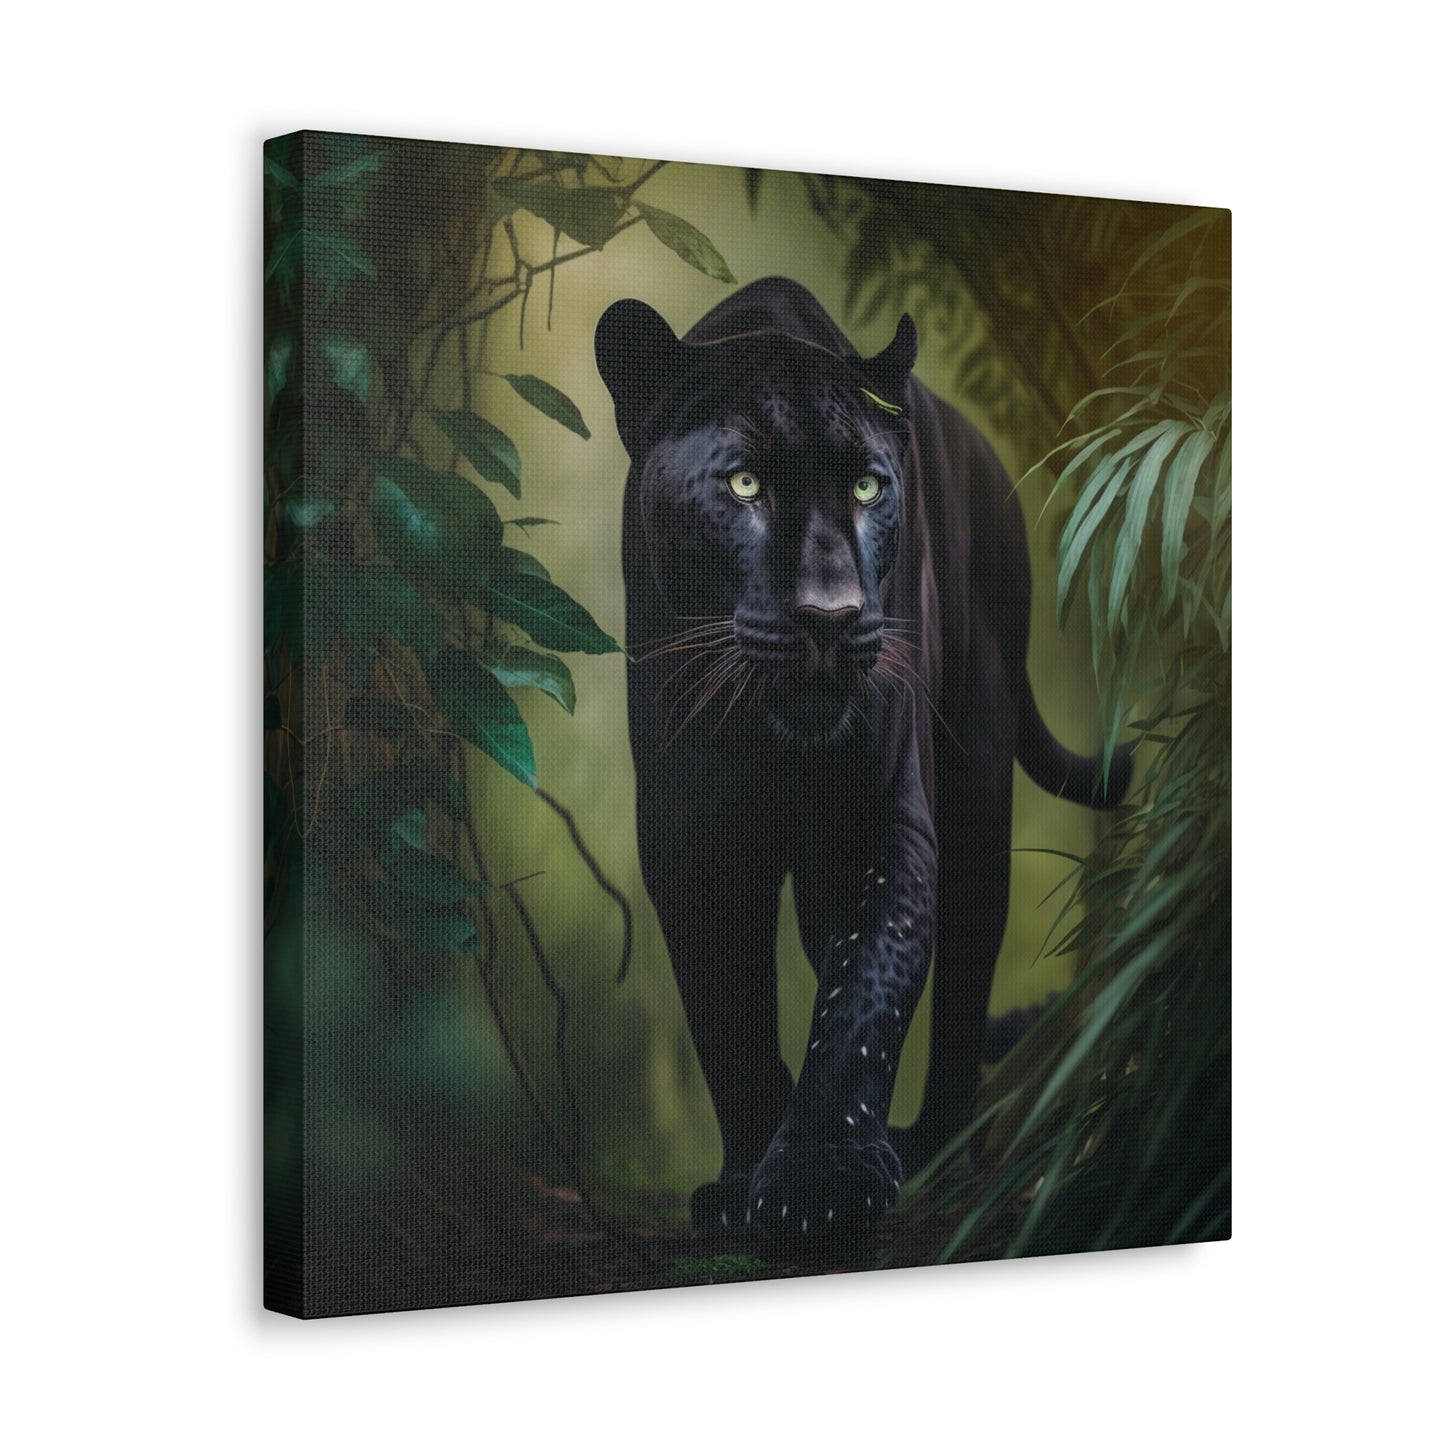 Black Panther in the Jungle 5